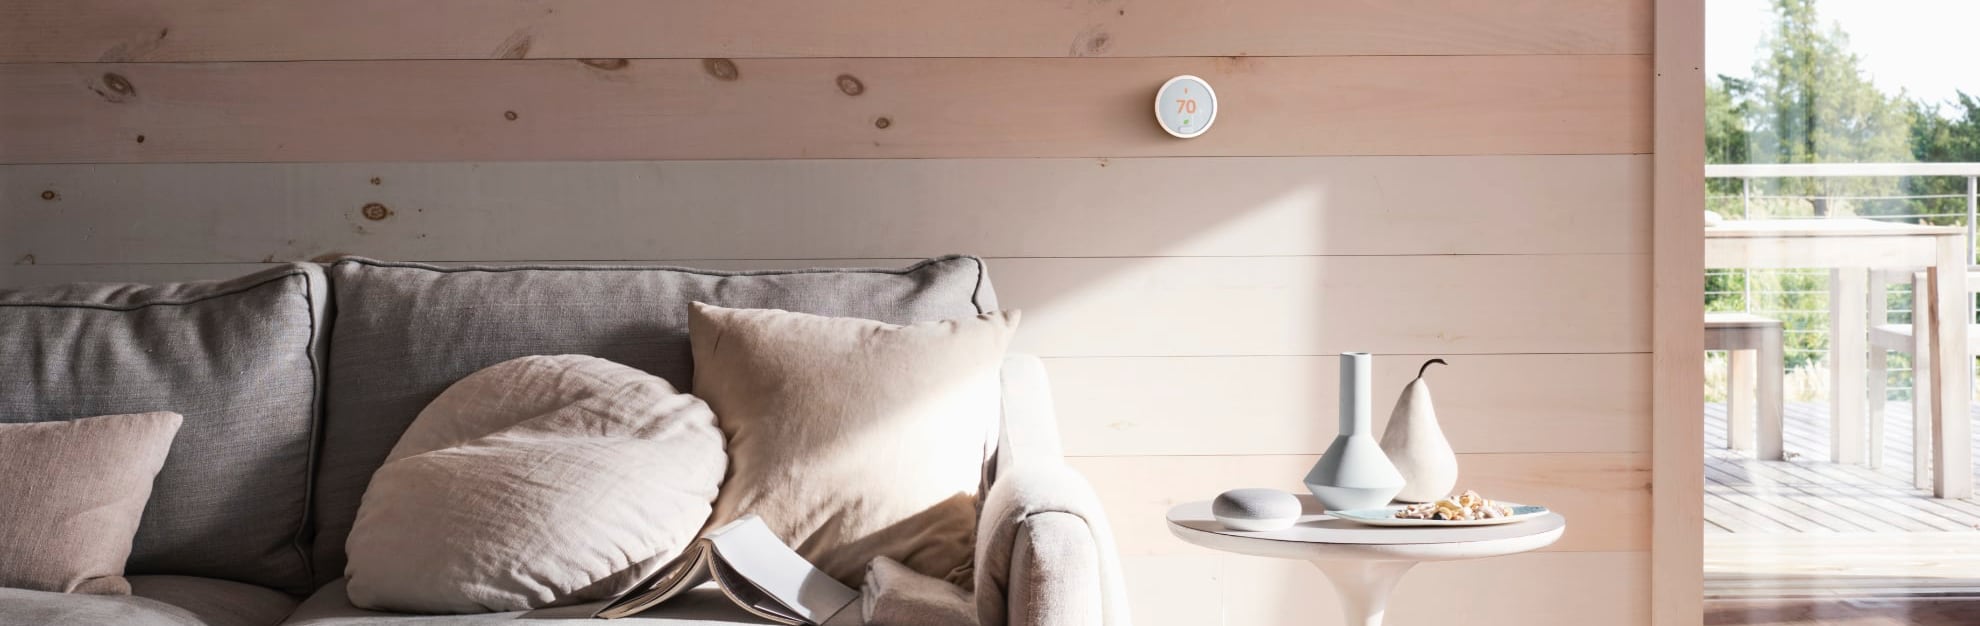 Vivint Home Automation in Seattle